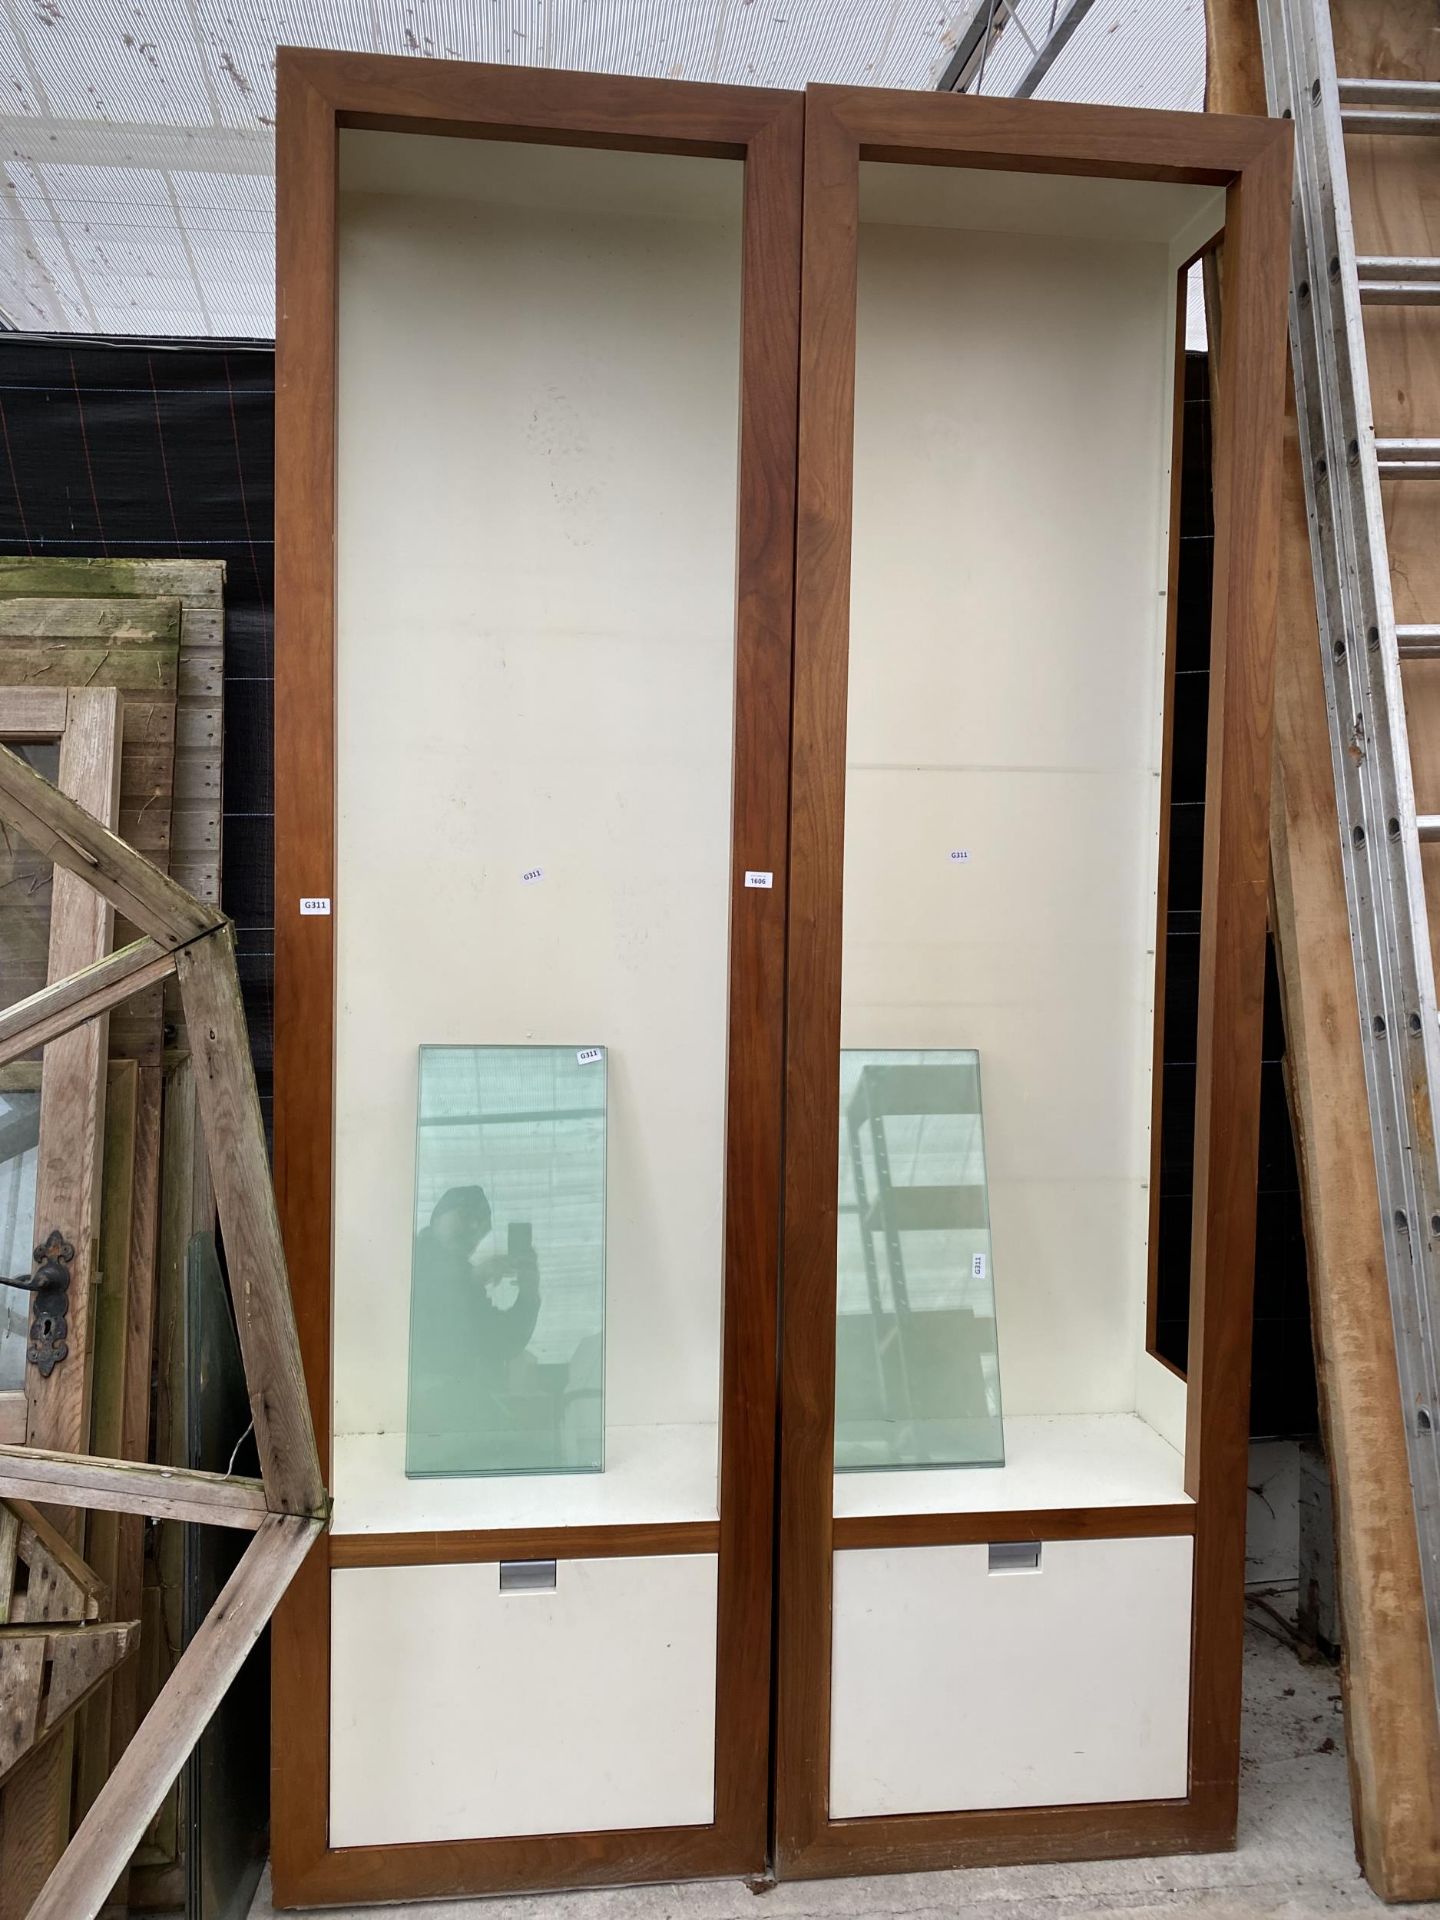 TWO WOODEN GLASS SHELVED SHOP DISPLAY UNITS